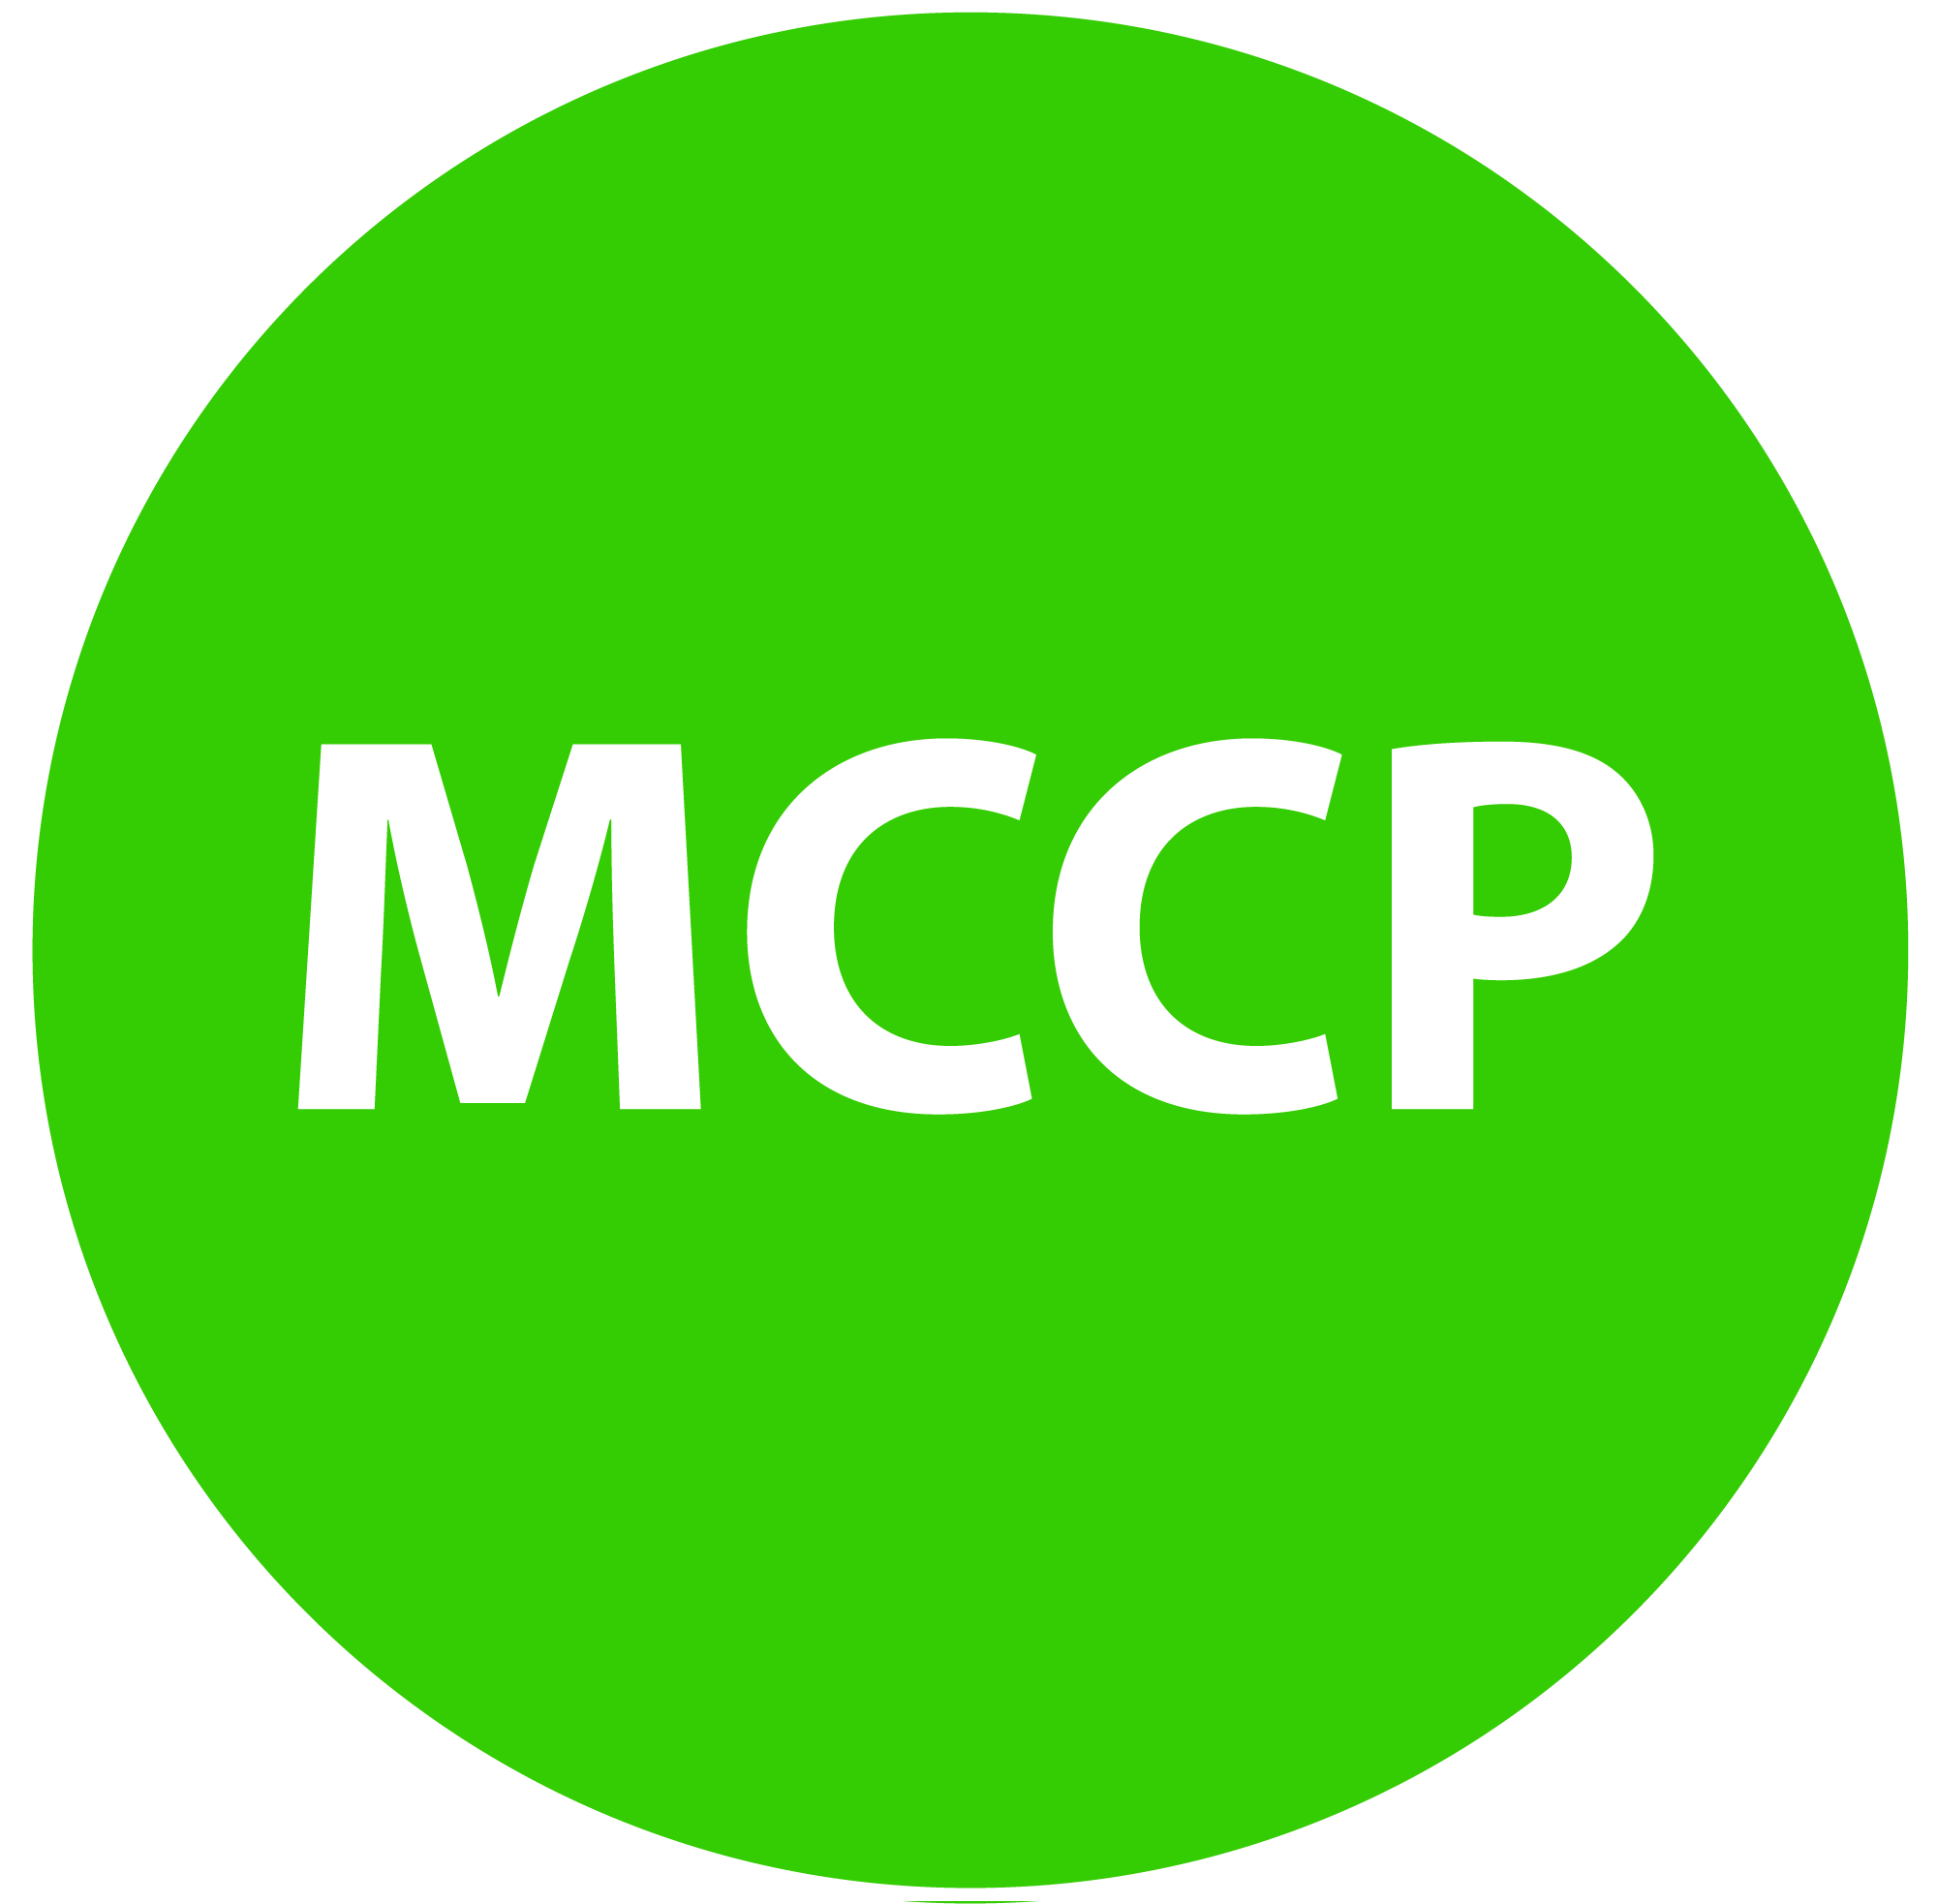 MCCP - The Independent Strategy Agency profile on Qualified.One